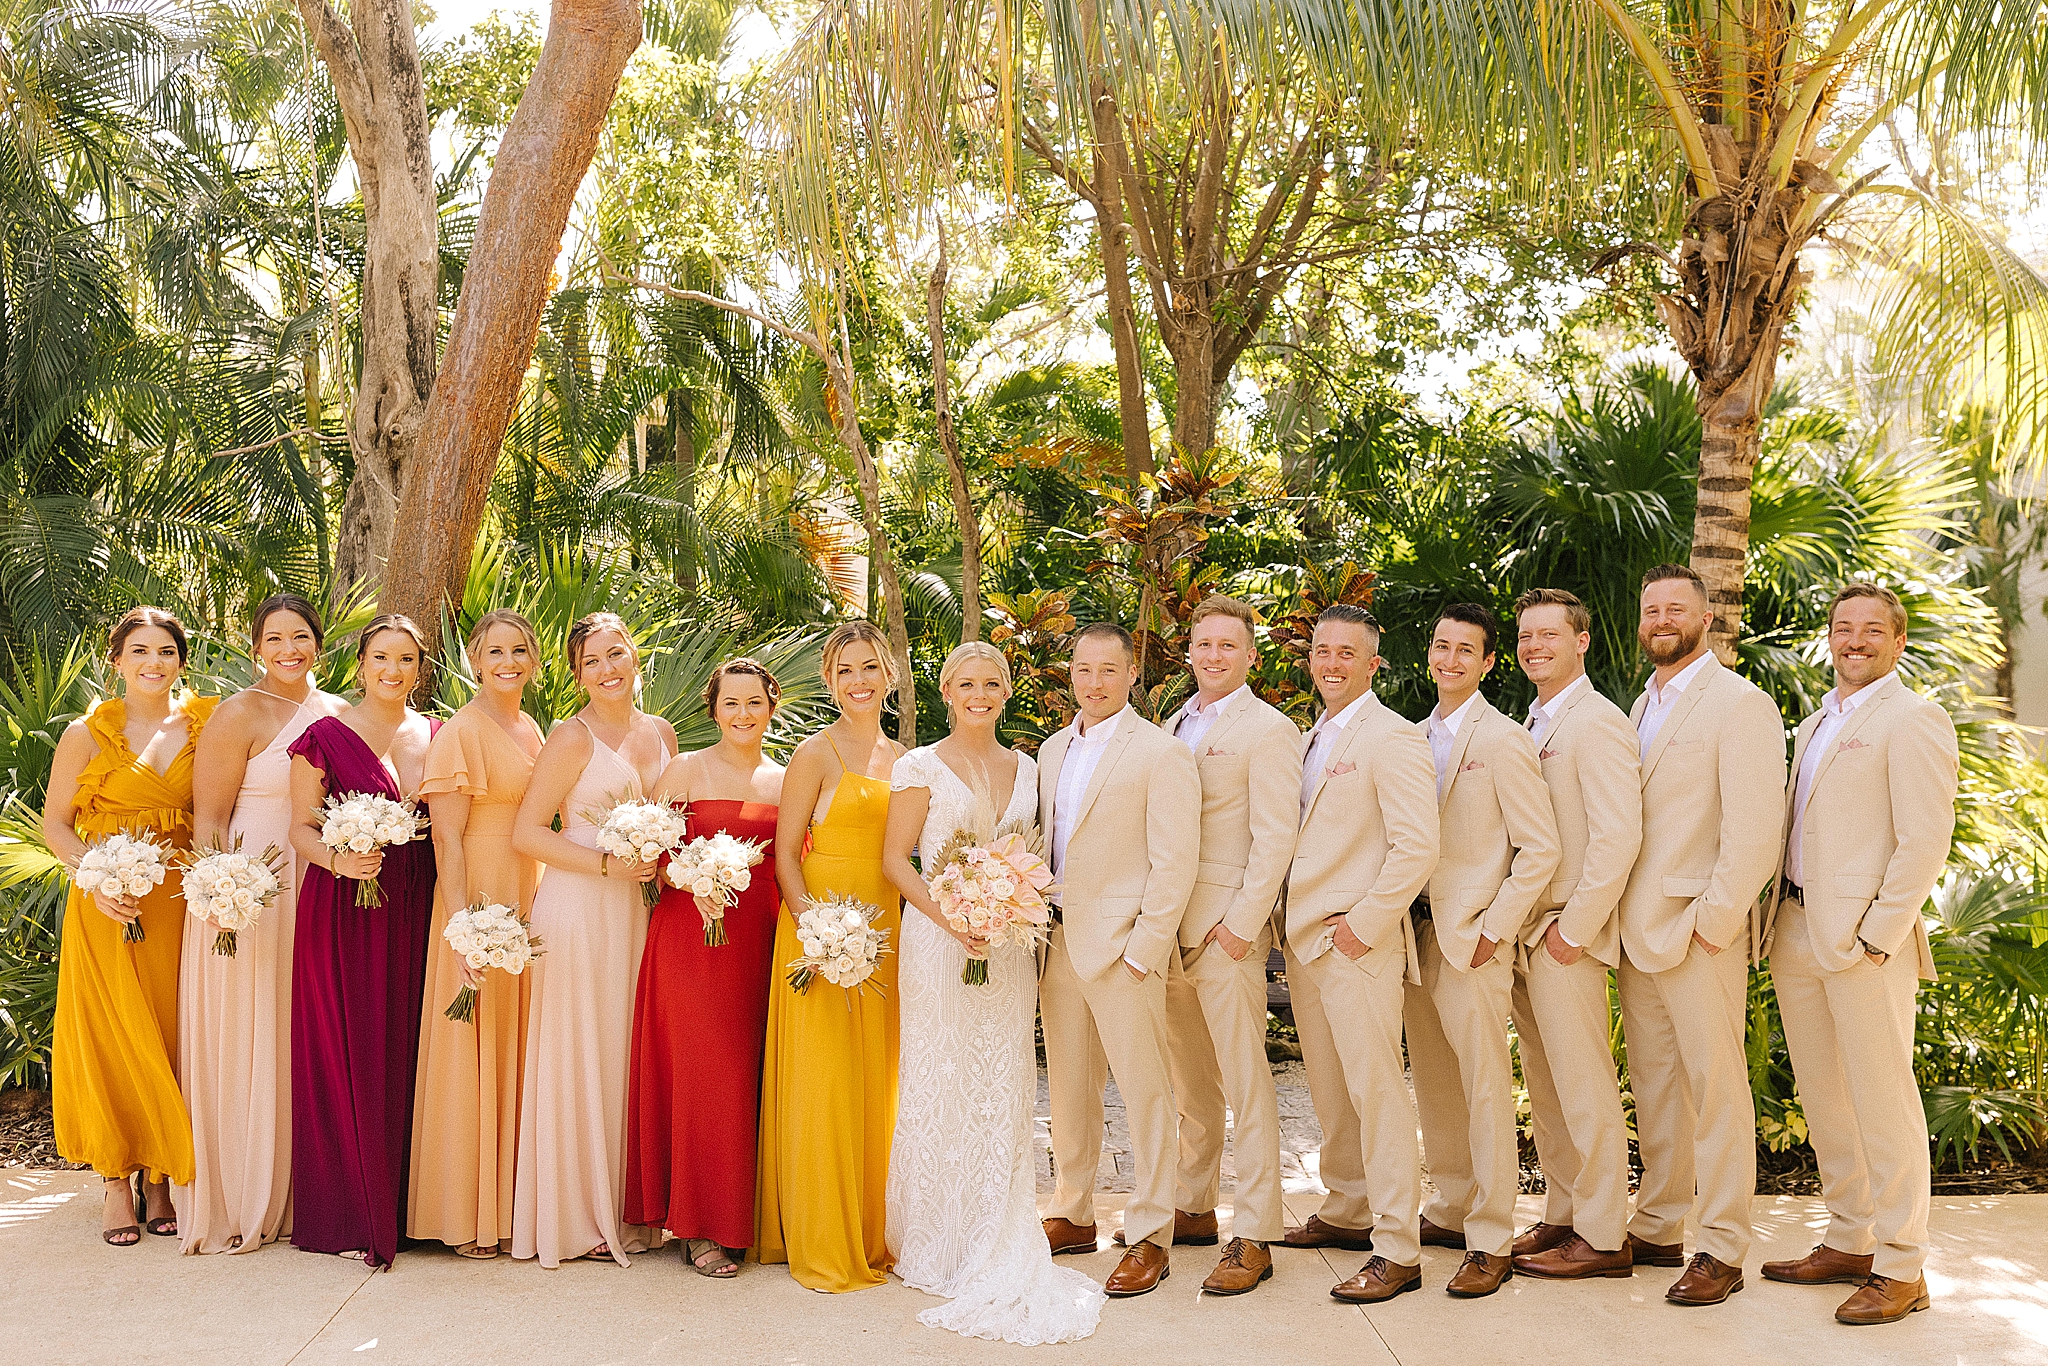 bridal party poses with newlyweds during Playa Del Carmen destination wedding